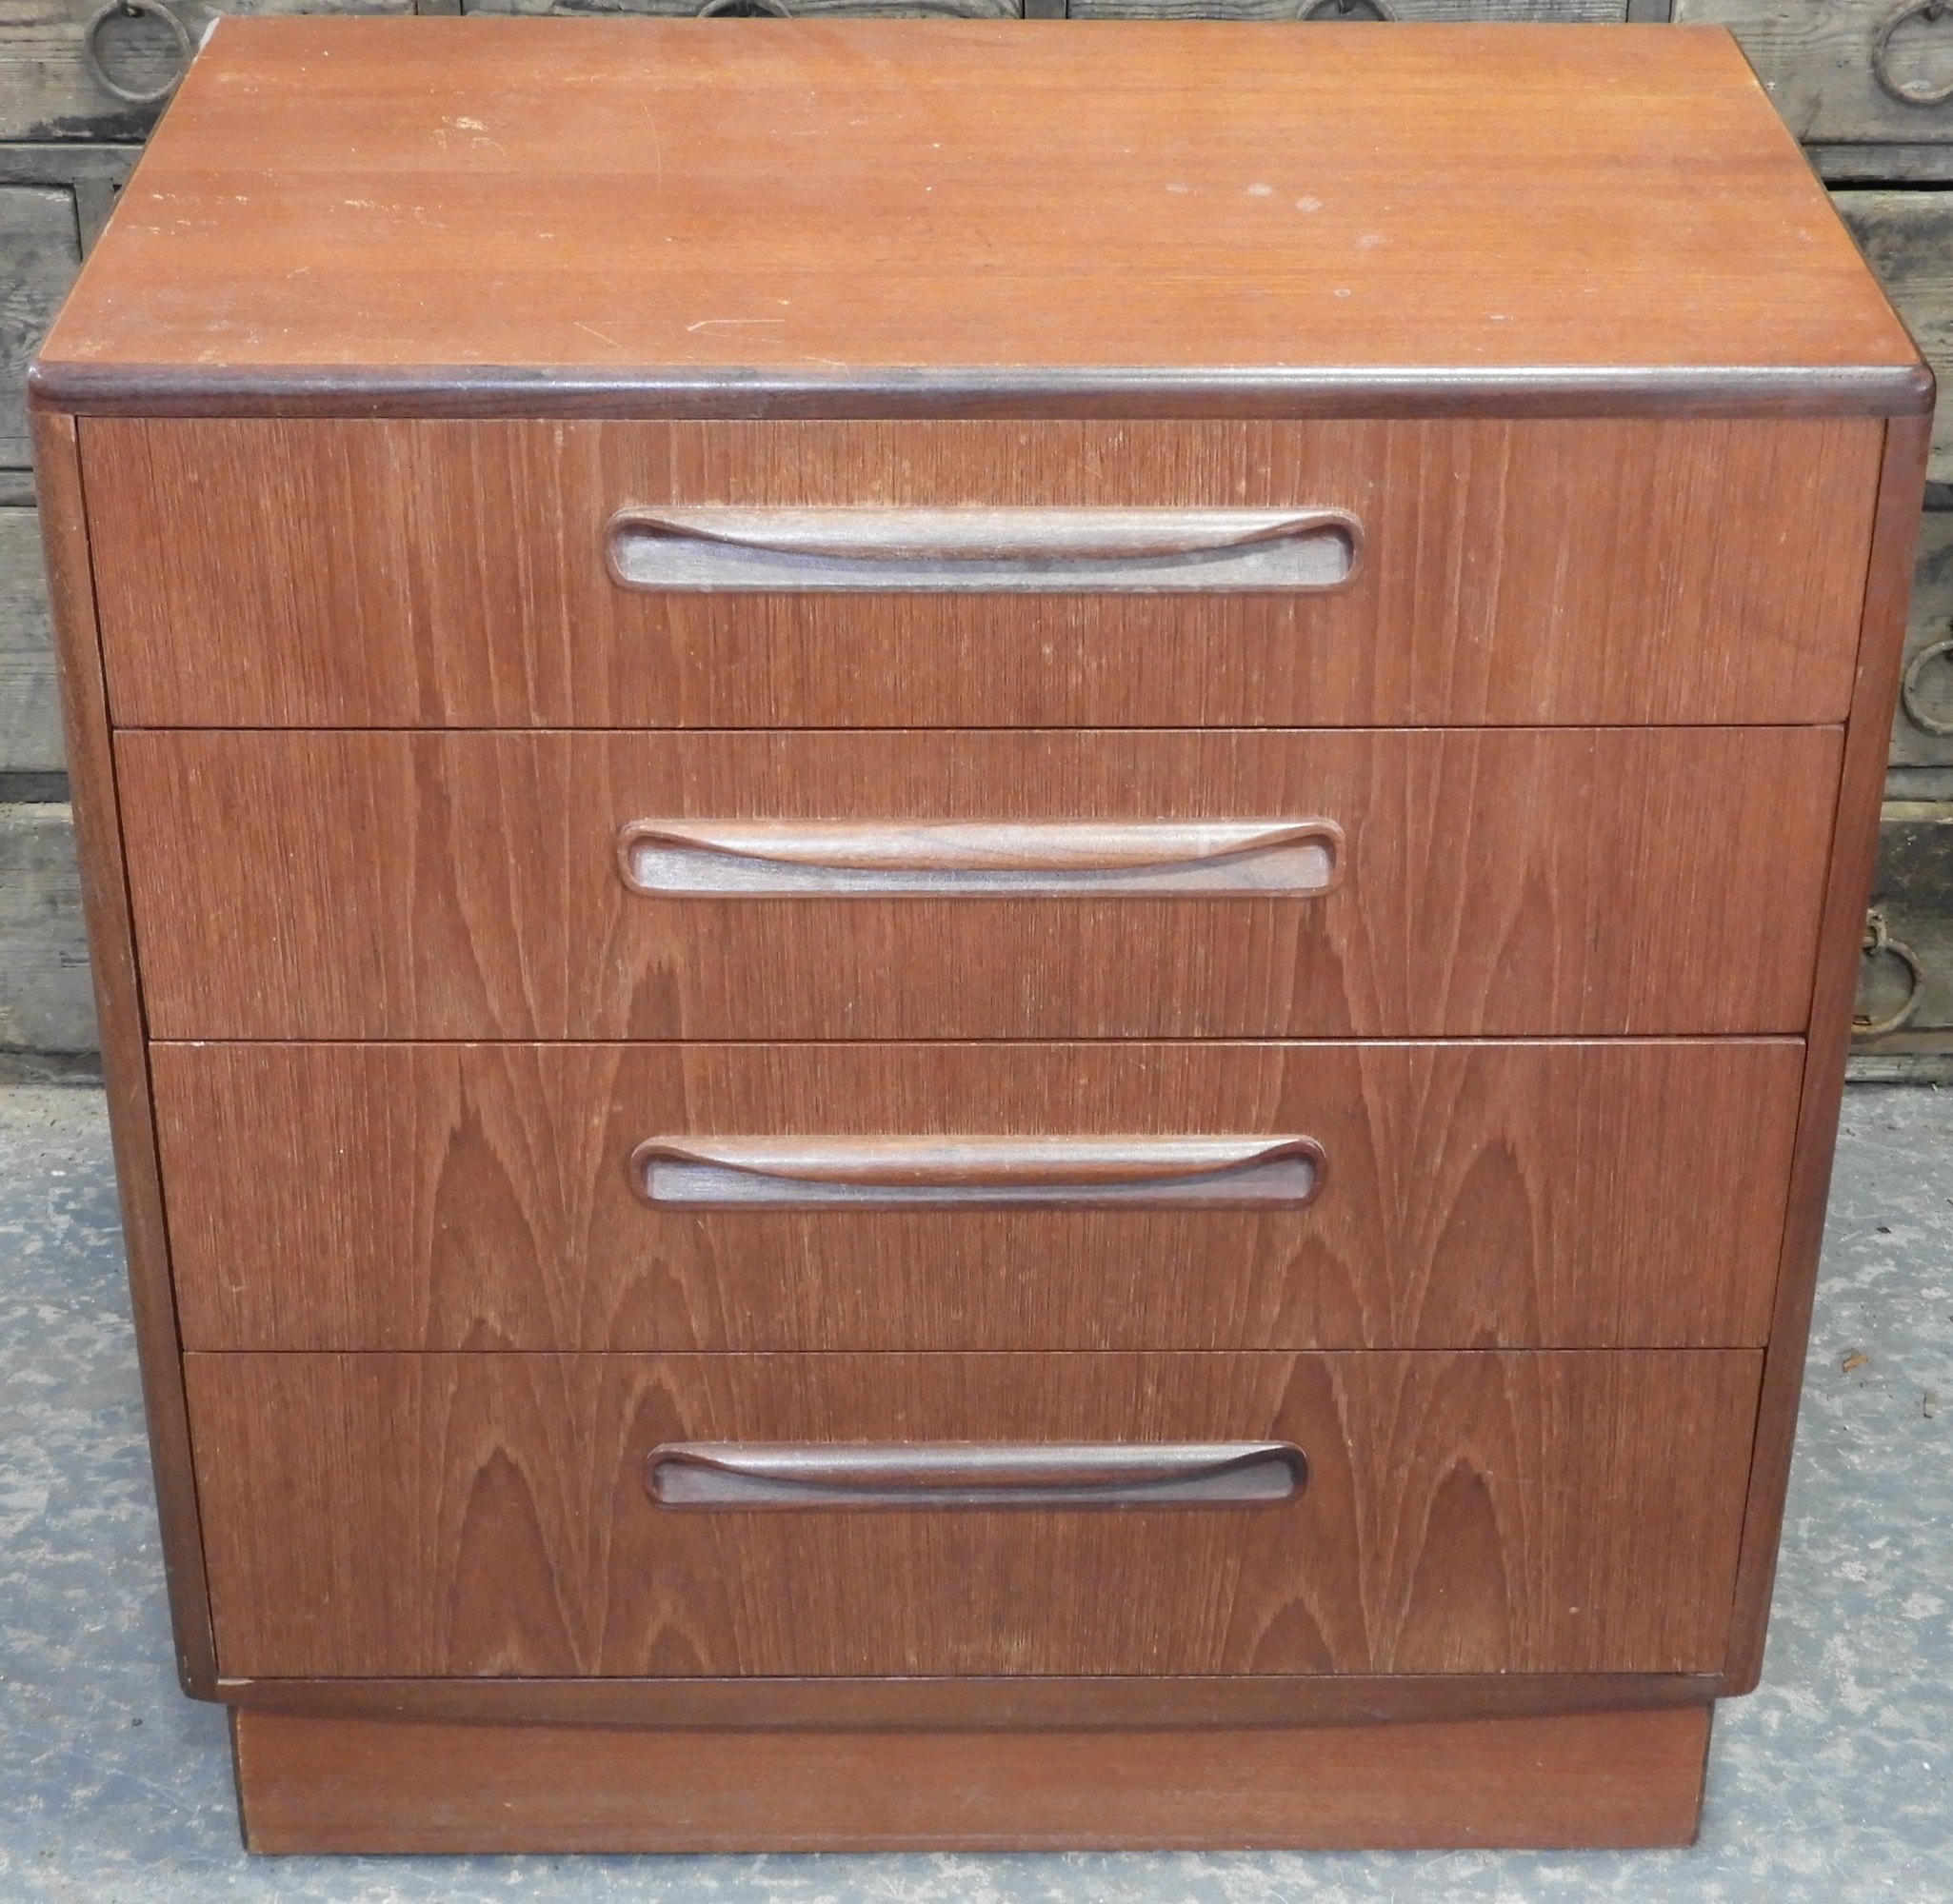 STAG TEAK CHEST OF 4 DRAWERS